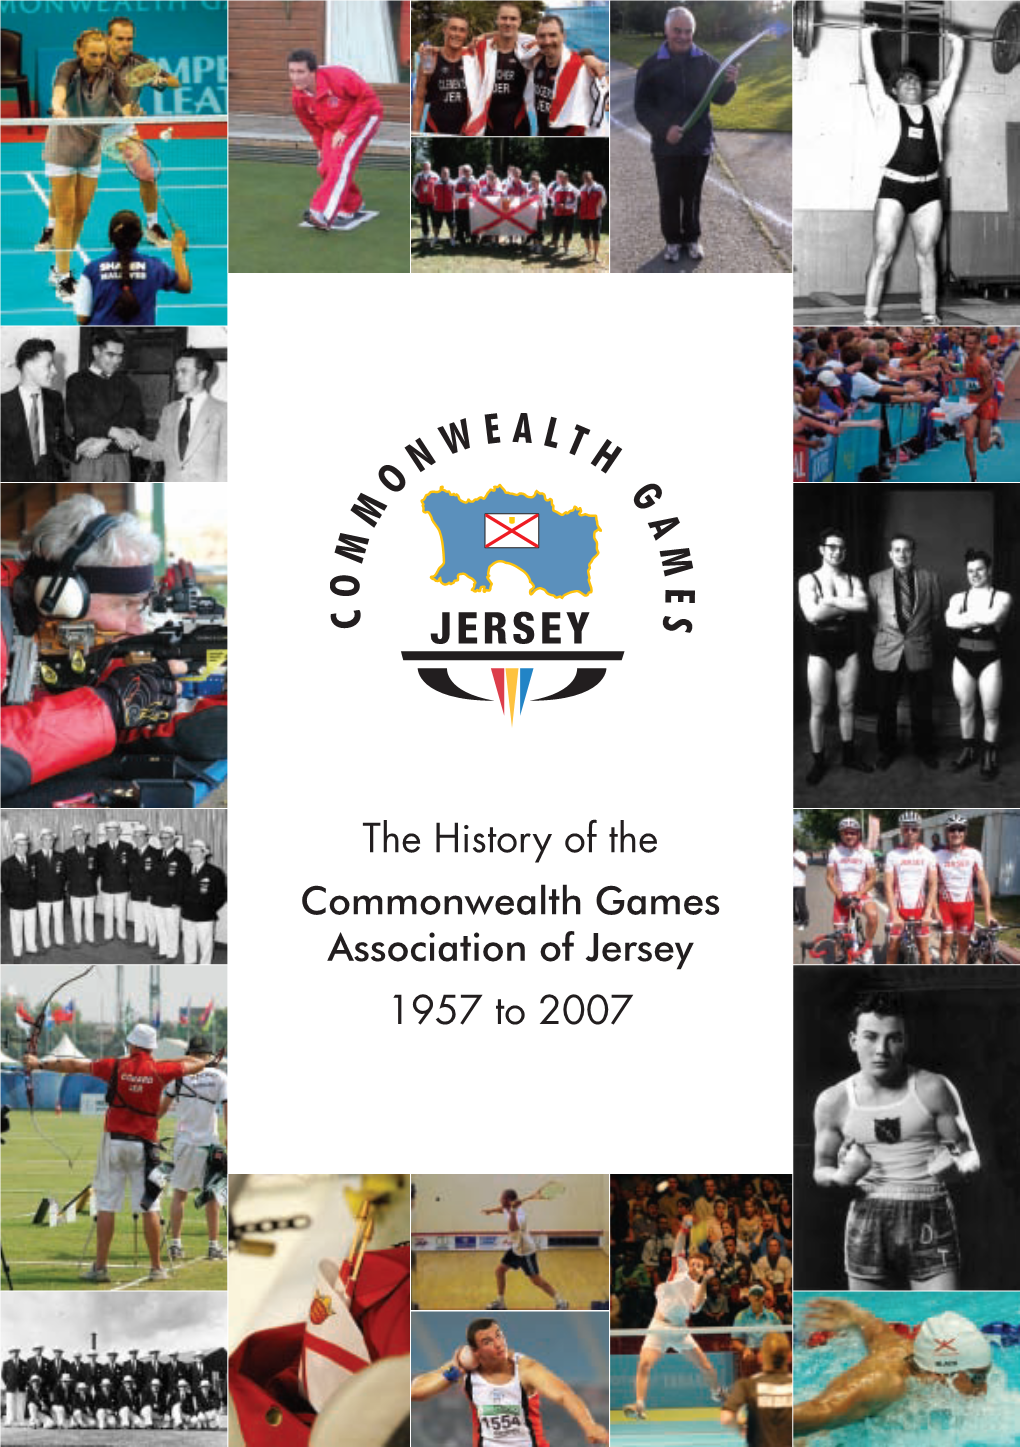 The History of the Commonwealth Games Association of Jersey 1957 to 2007 3 1 2 5 6 4